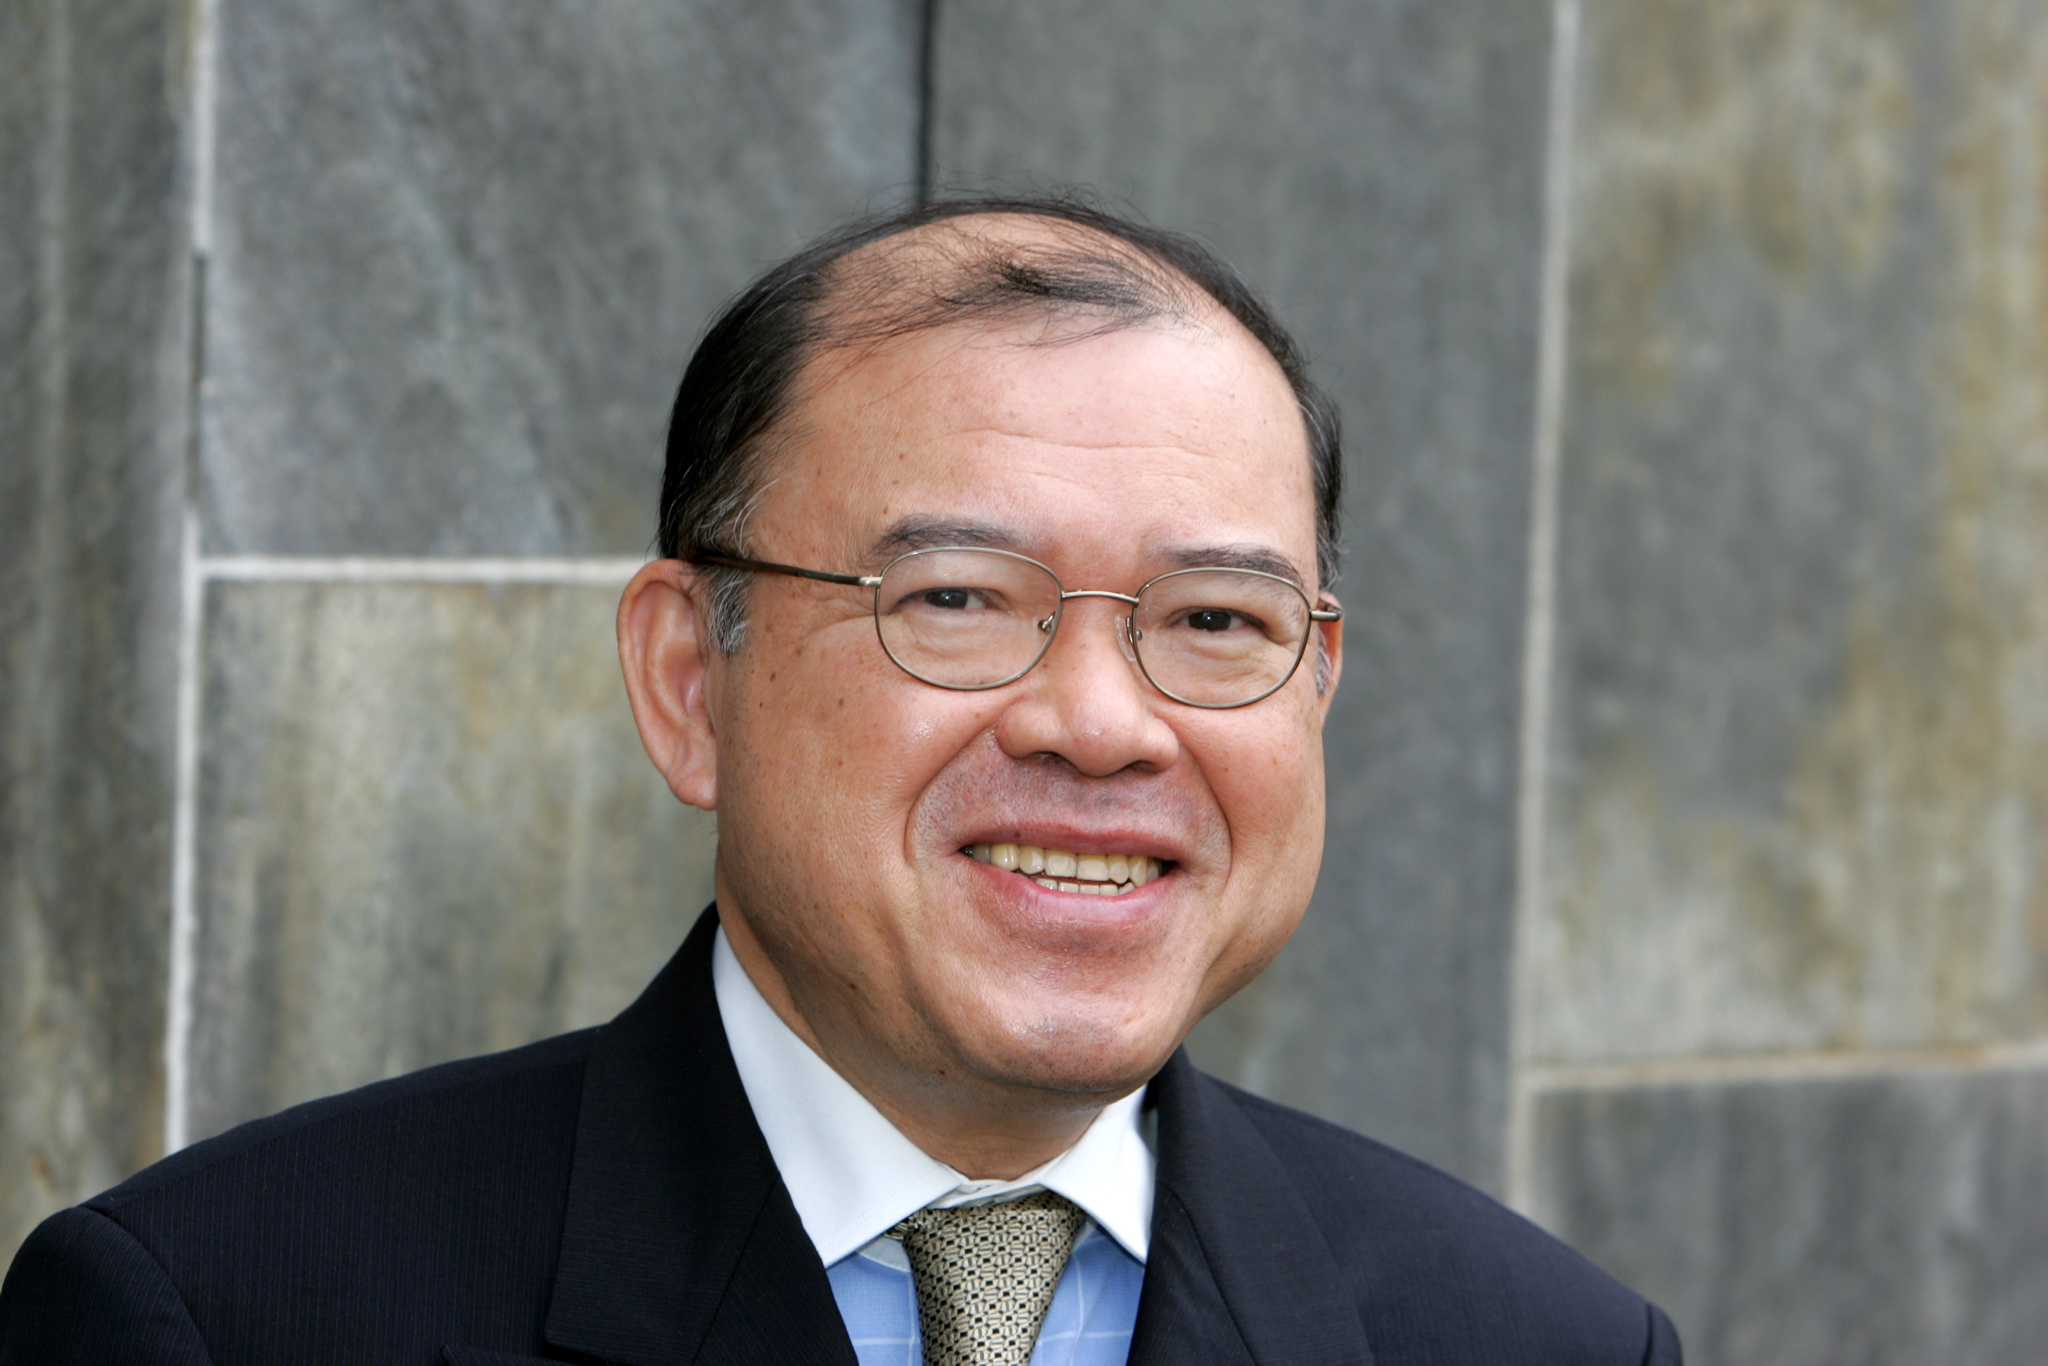 Interview with Dr Supachai Panitchpakdi, Secretary-General of the United Nations Conference on Trade and Development (UNCTAD)